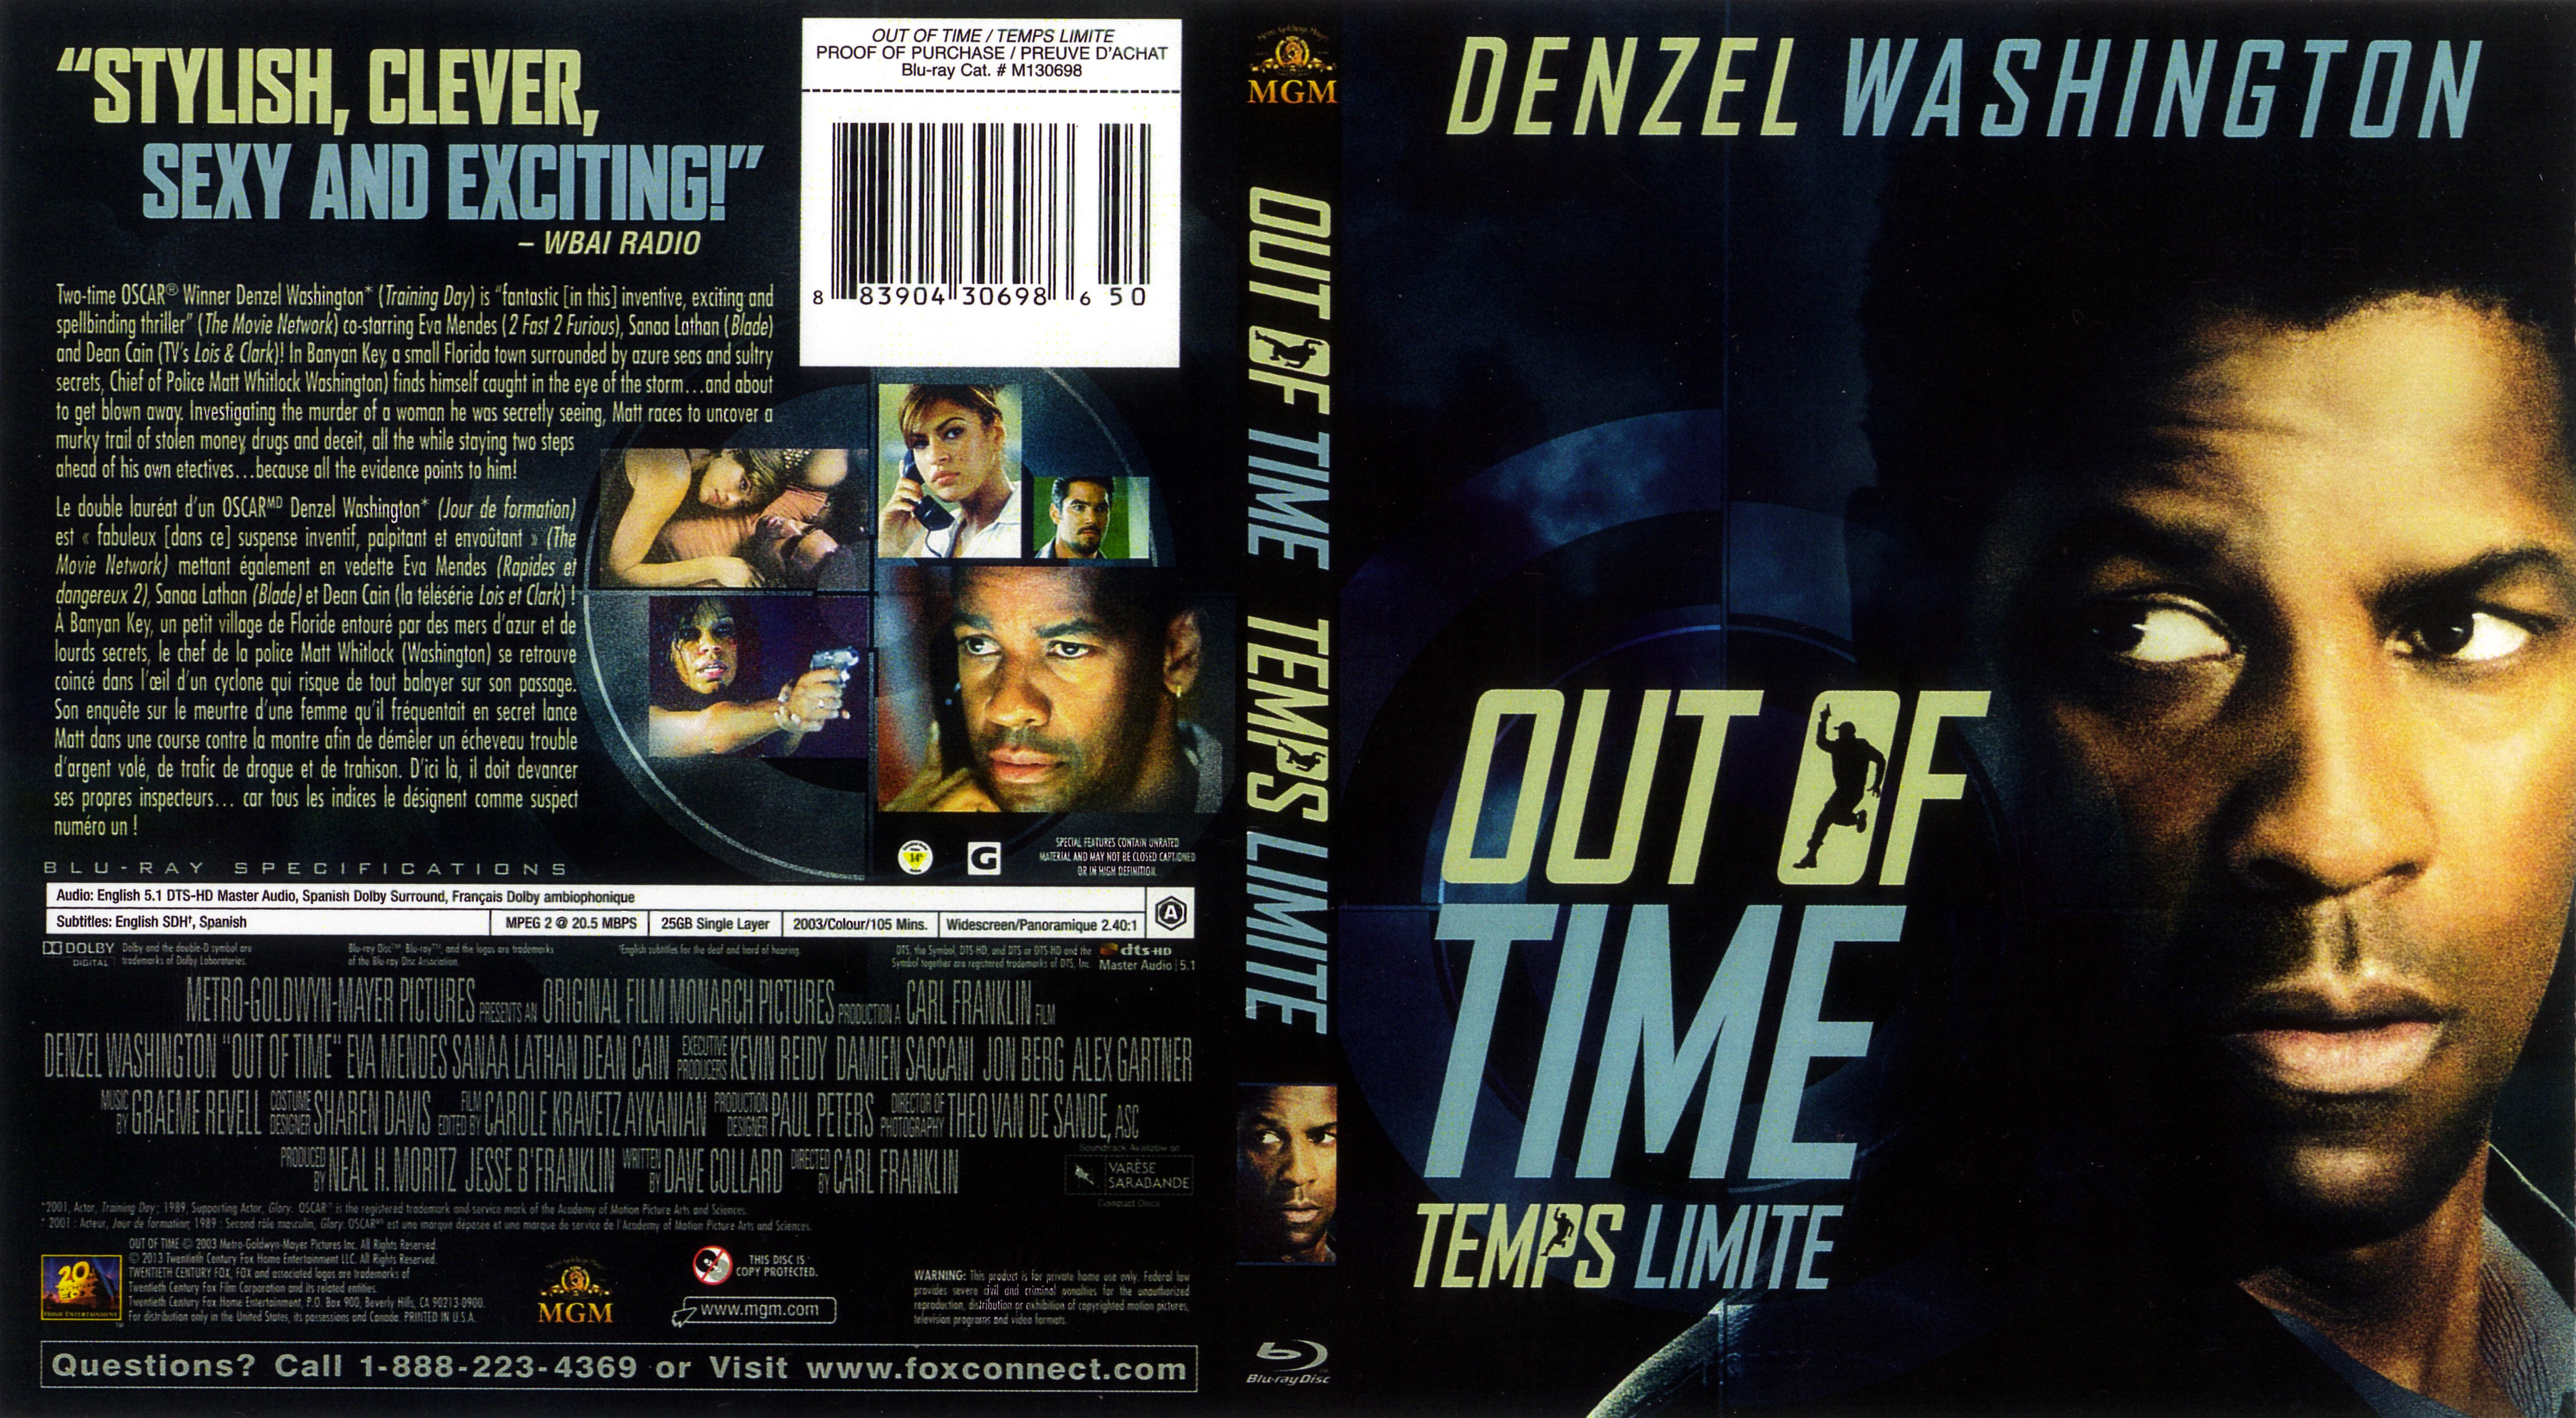 Jaquette DVD Out of time - Temps limite (Canadienne) (BLU-RAY)